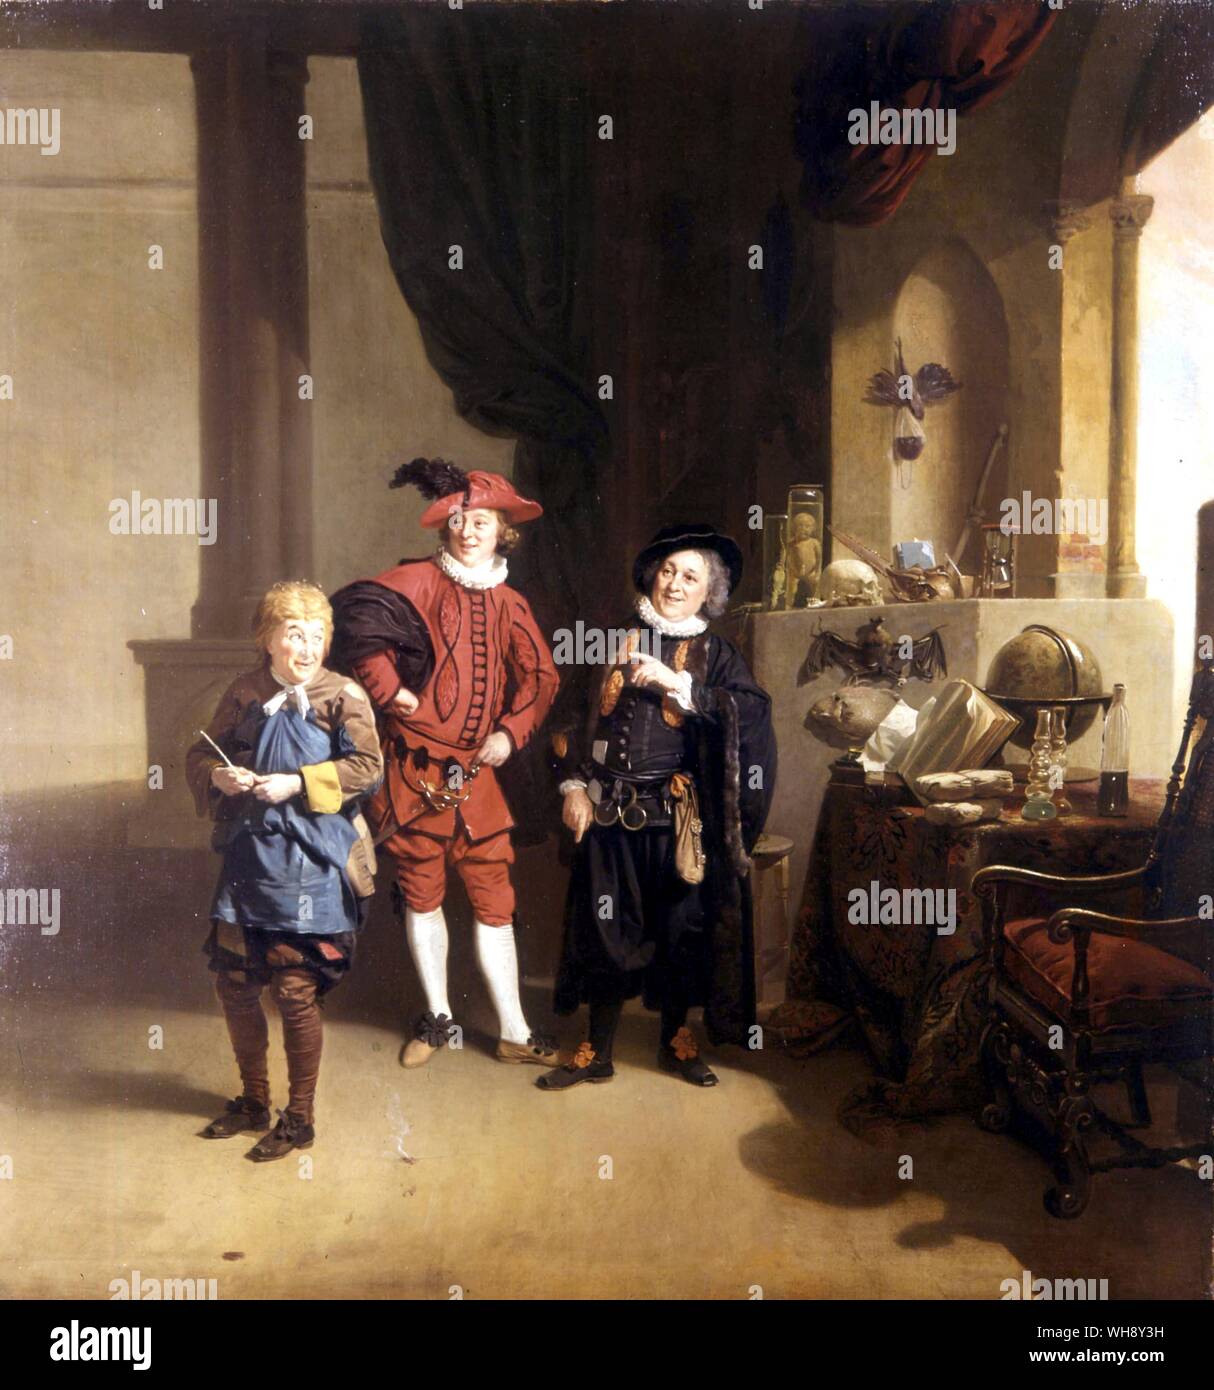 David Garrick as Abel Drugger with William Burton as Subtle and John Palmer as Face in The Alchemist Theatre Royal Drury Lane 1769 Stock Photo